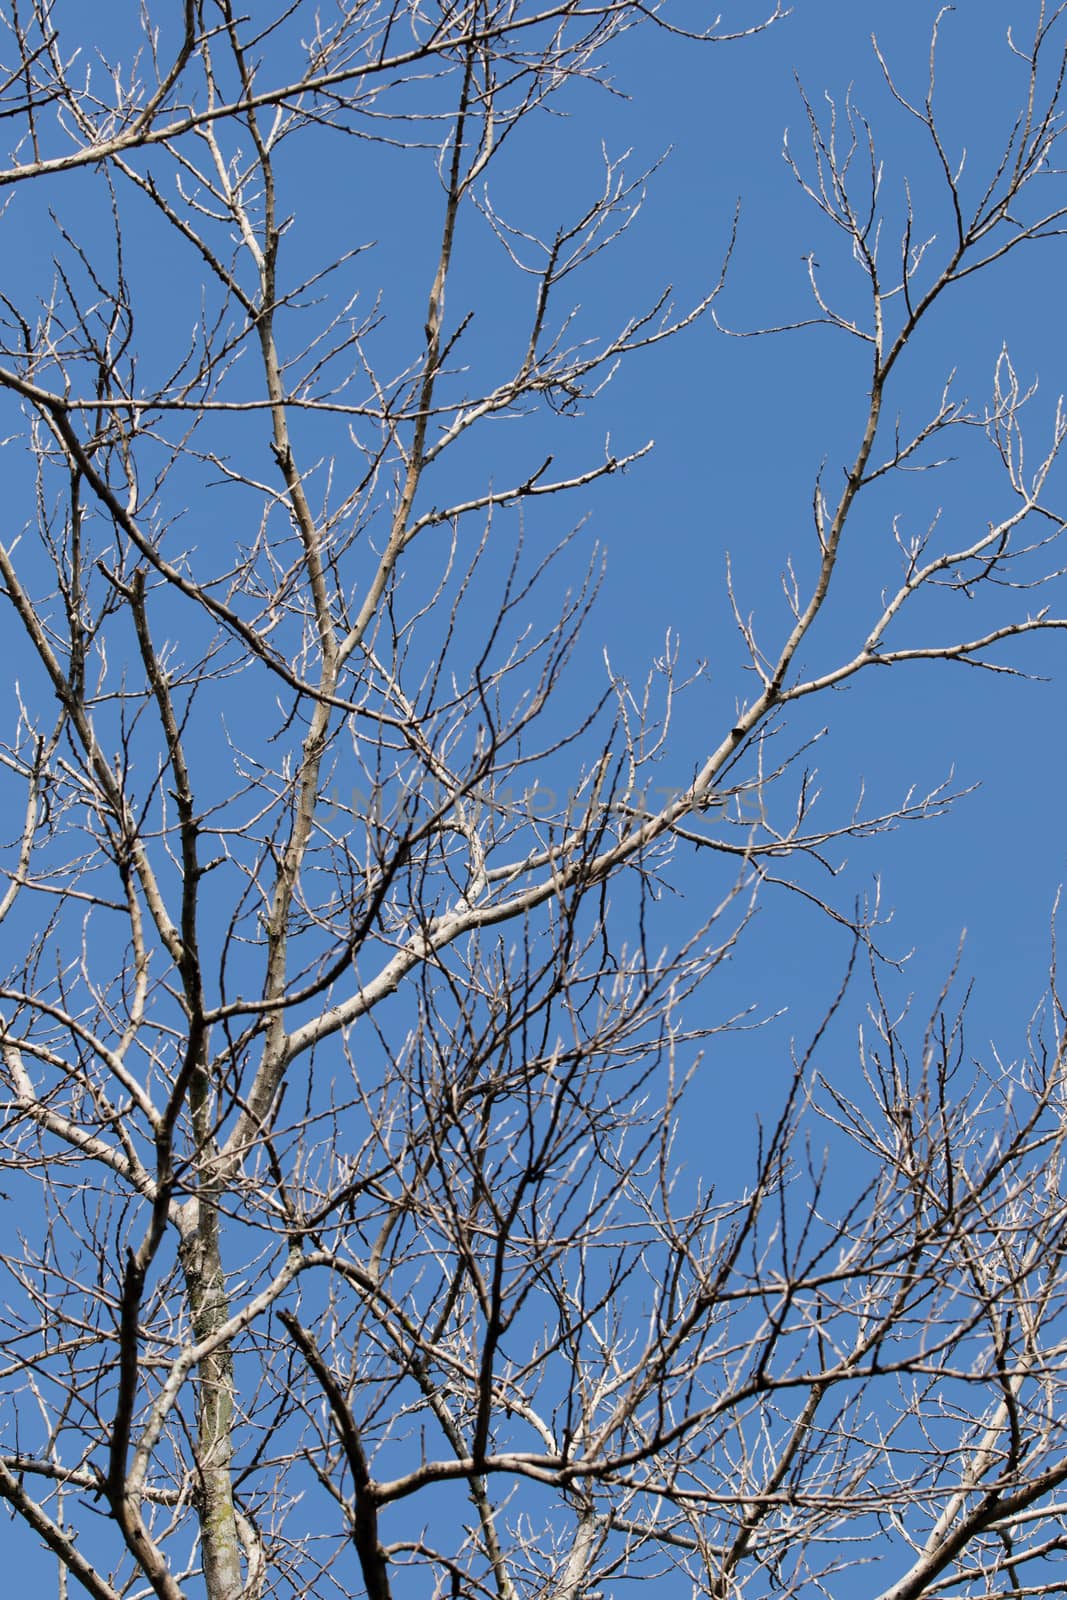 Dead branch against the clear blue sky in the morning